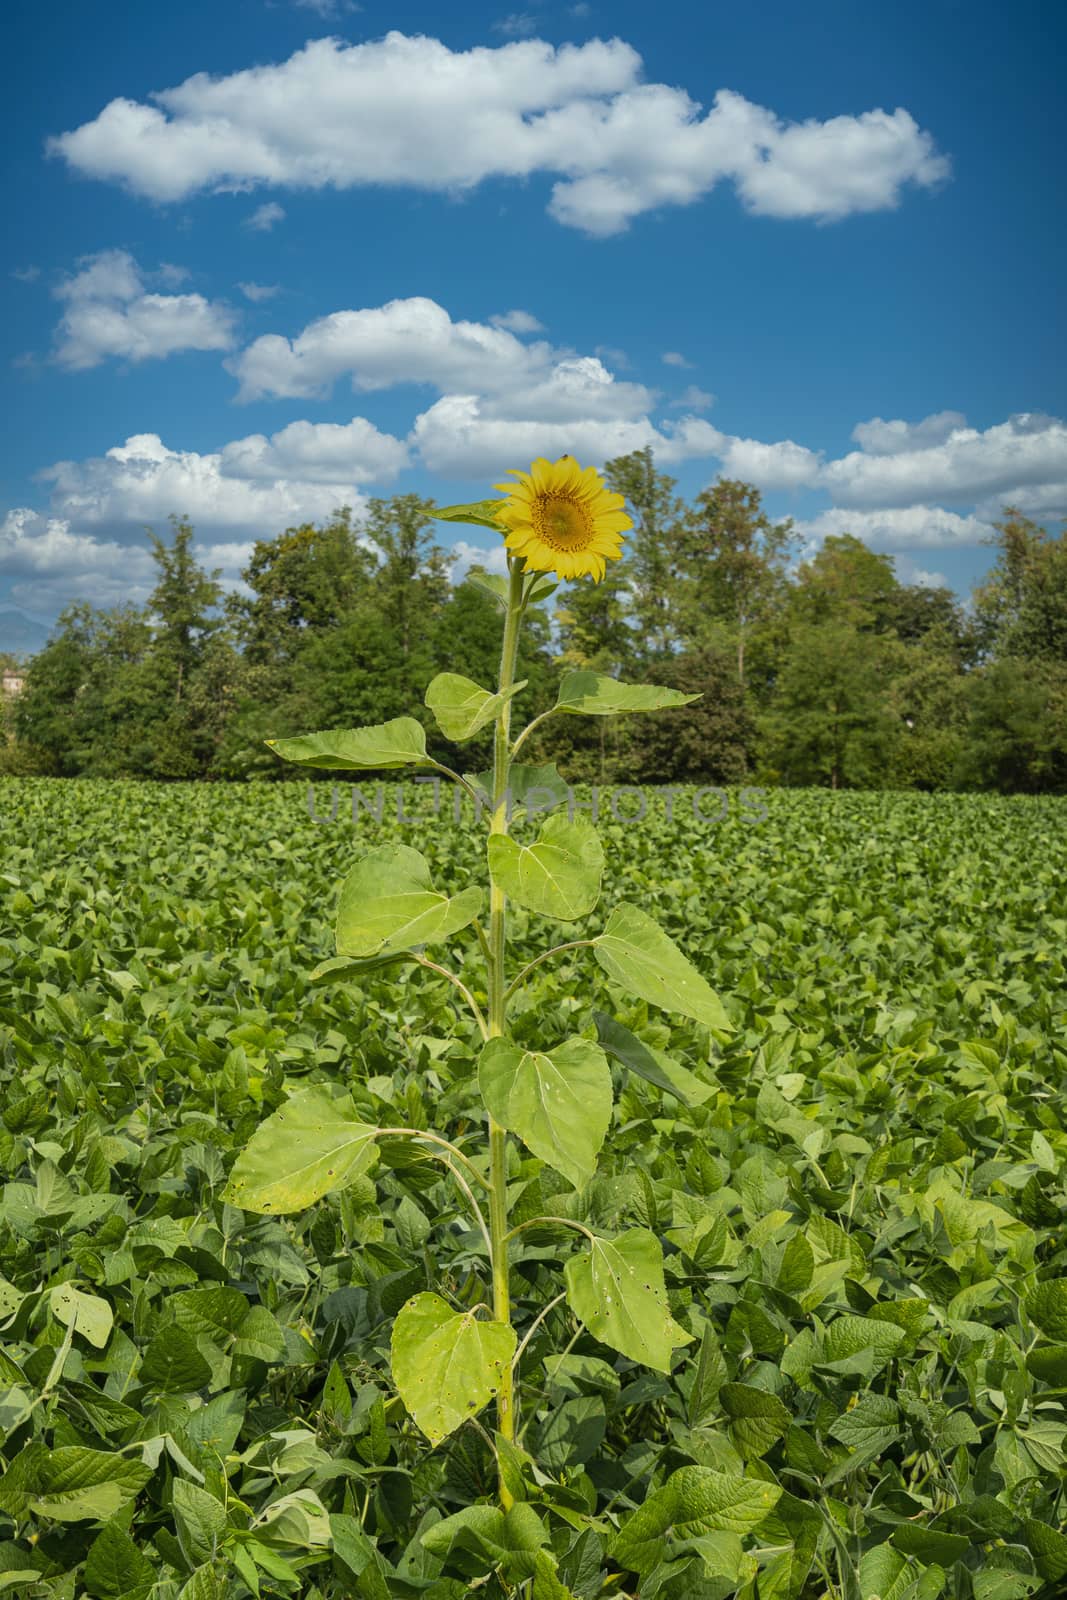 an isolated sunflower in the middle of a cultivated field